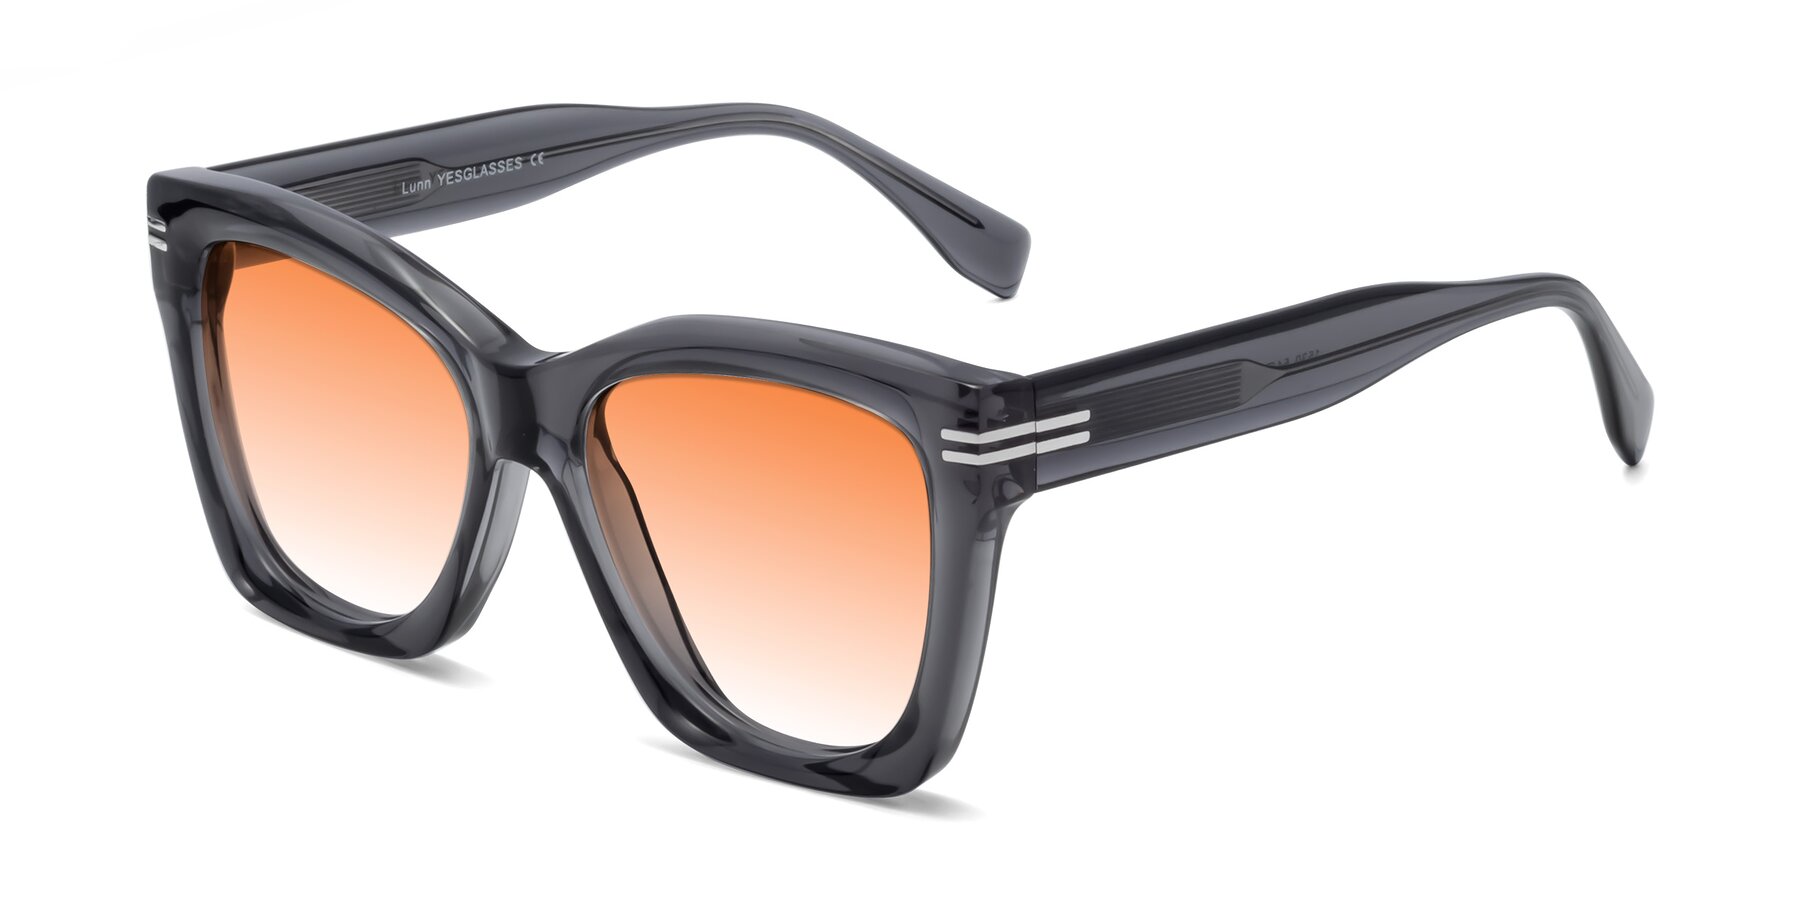 Angle of Lunn in Translucent Gray with Orange Gradient Lenses